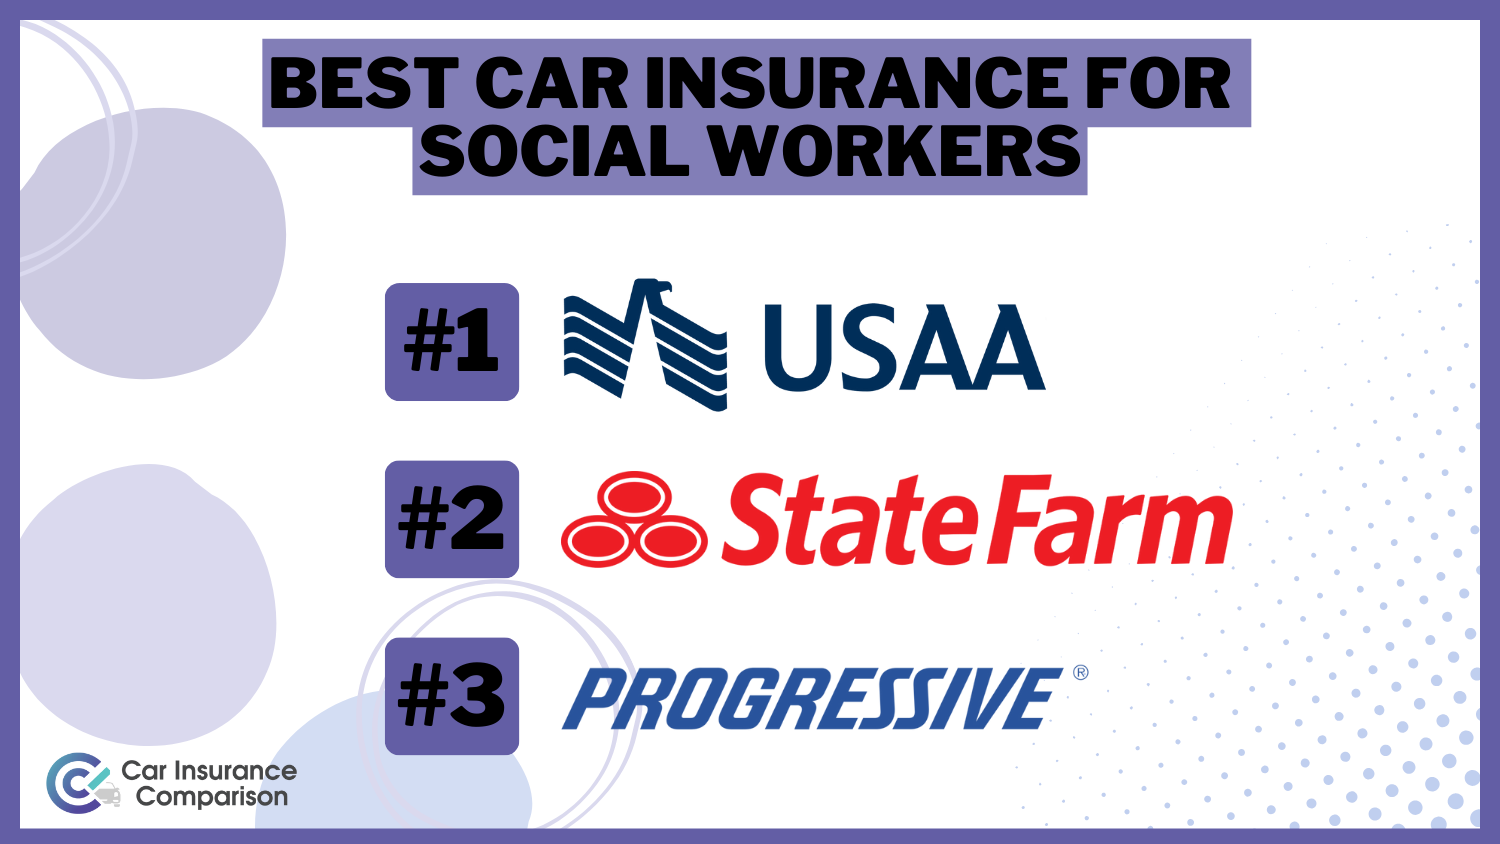 Best Car Insurance for Social Workers: USAA, State Farm and Progressive